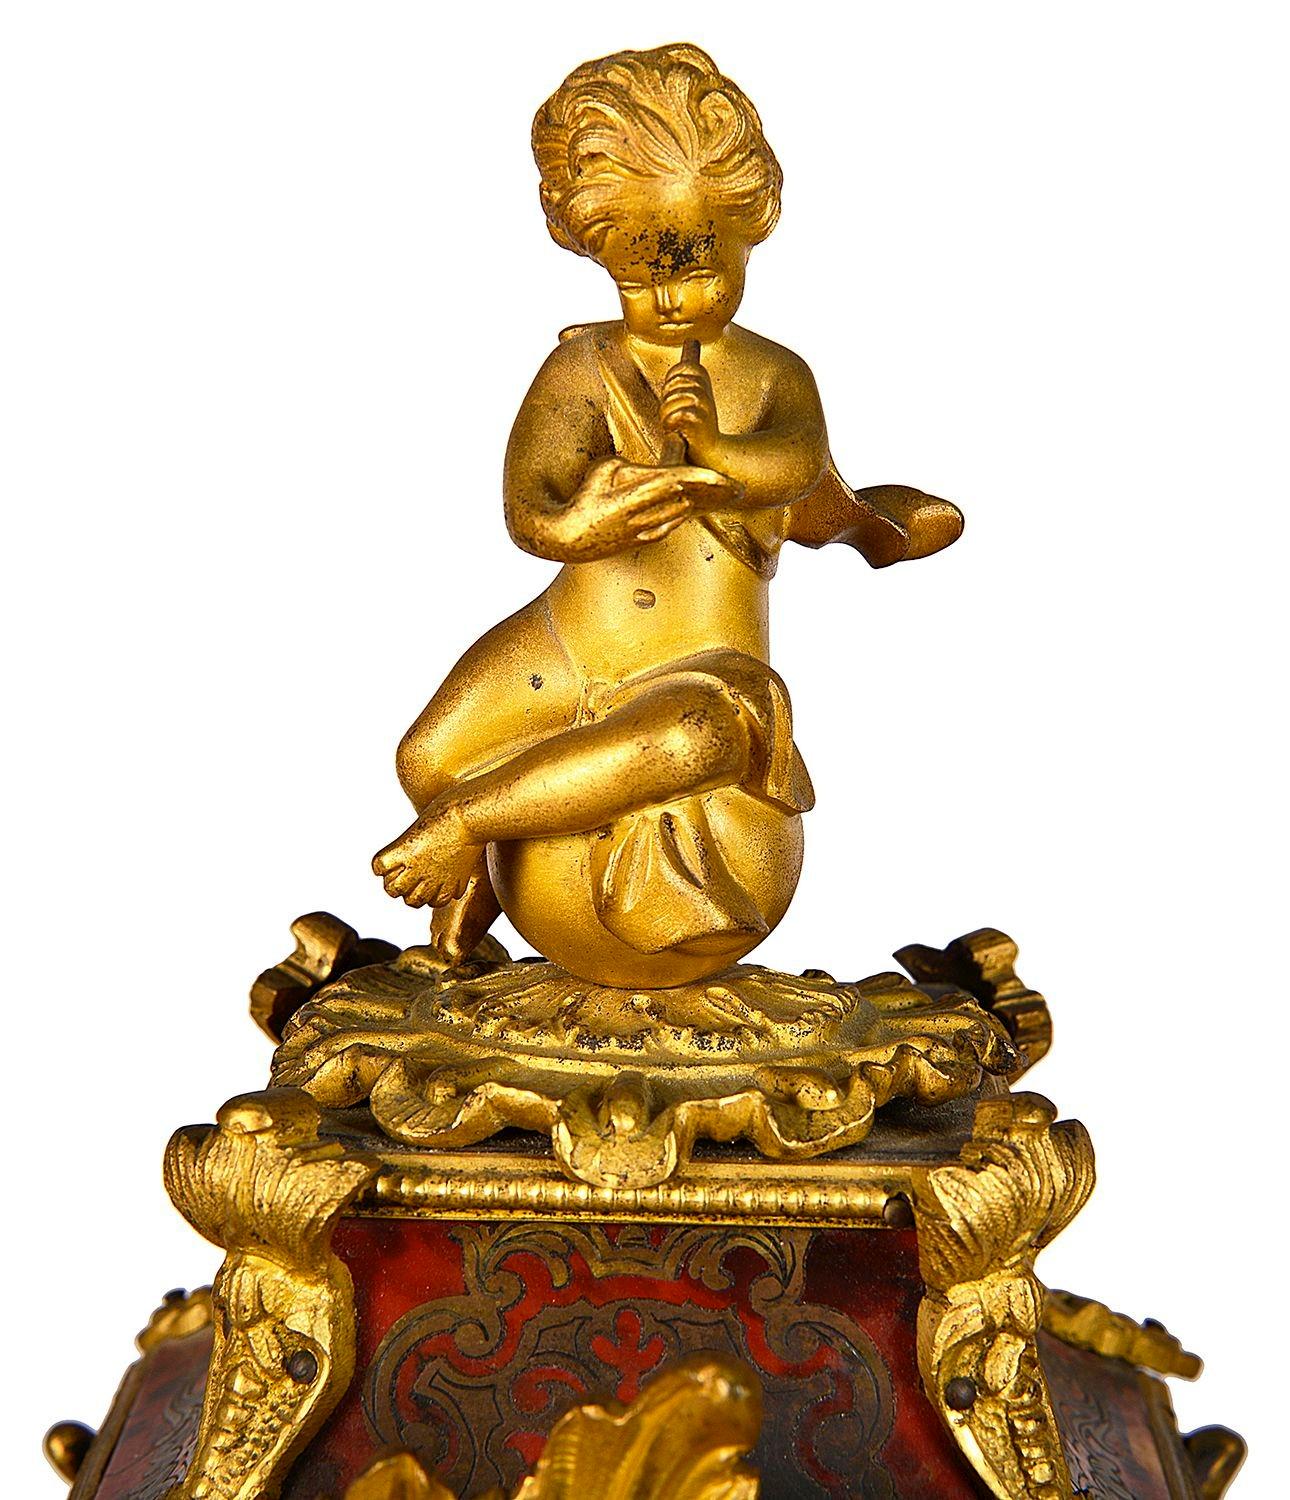 A very good quality French 19th Century Boulle mantle clock, having a gilded ormolu putti seated on the top, Red tortoiseshell and brass inlay to the serpentine shaped case, wonderful gilded rococo style ormolu mounts and feet. The white and blue